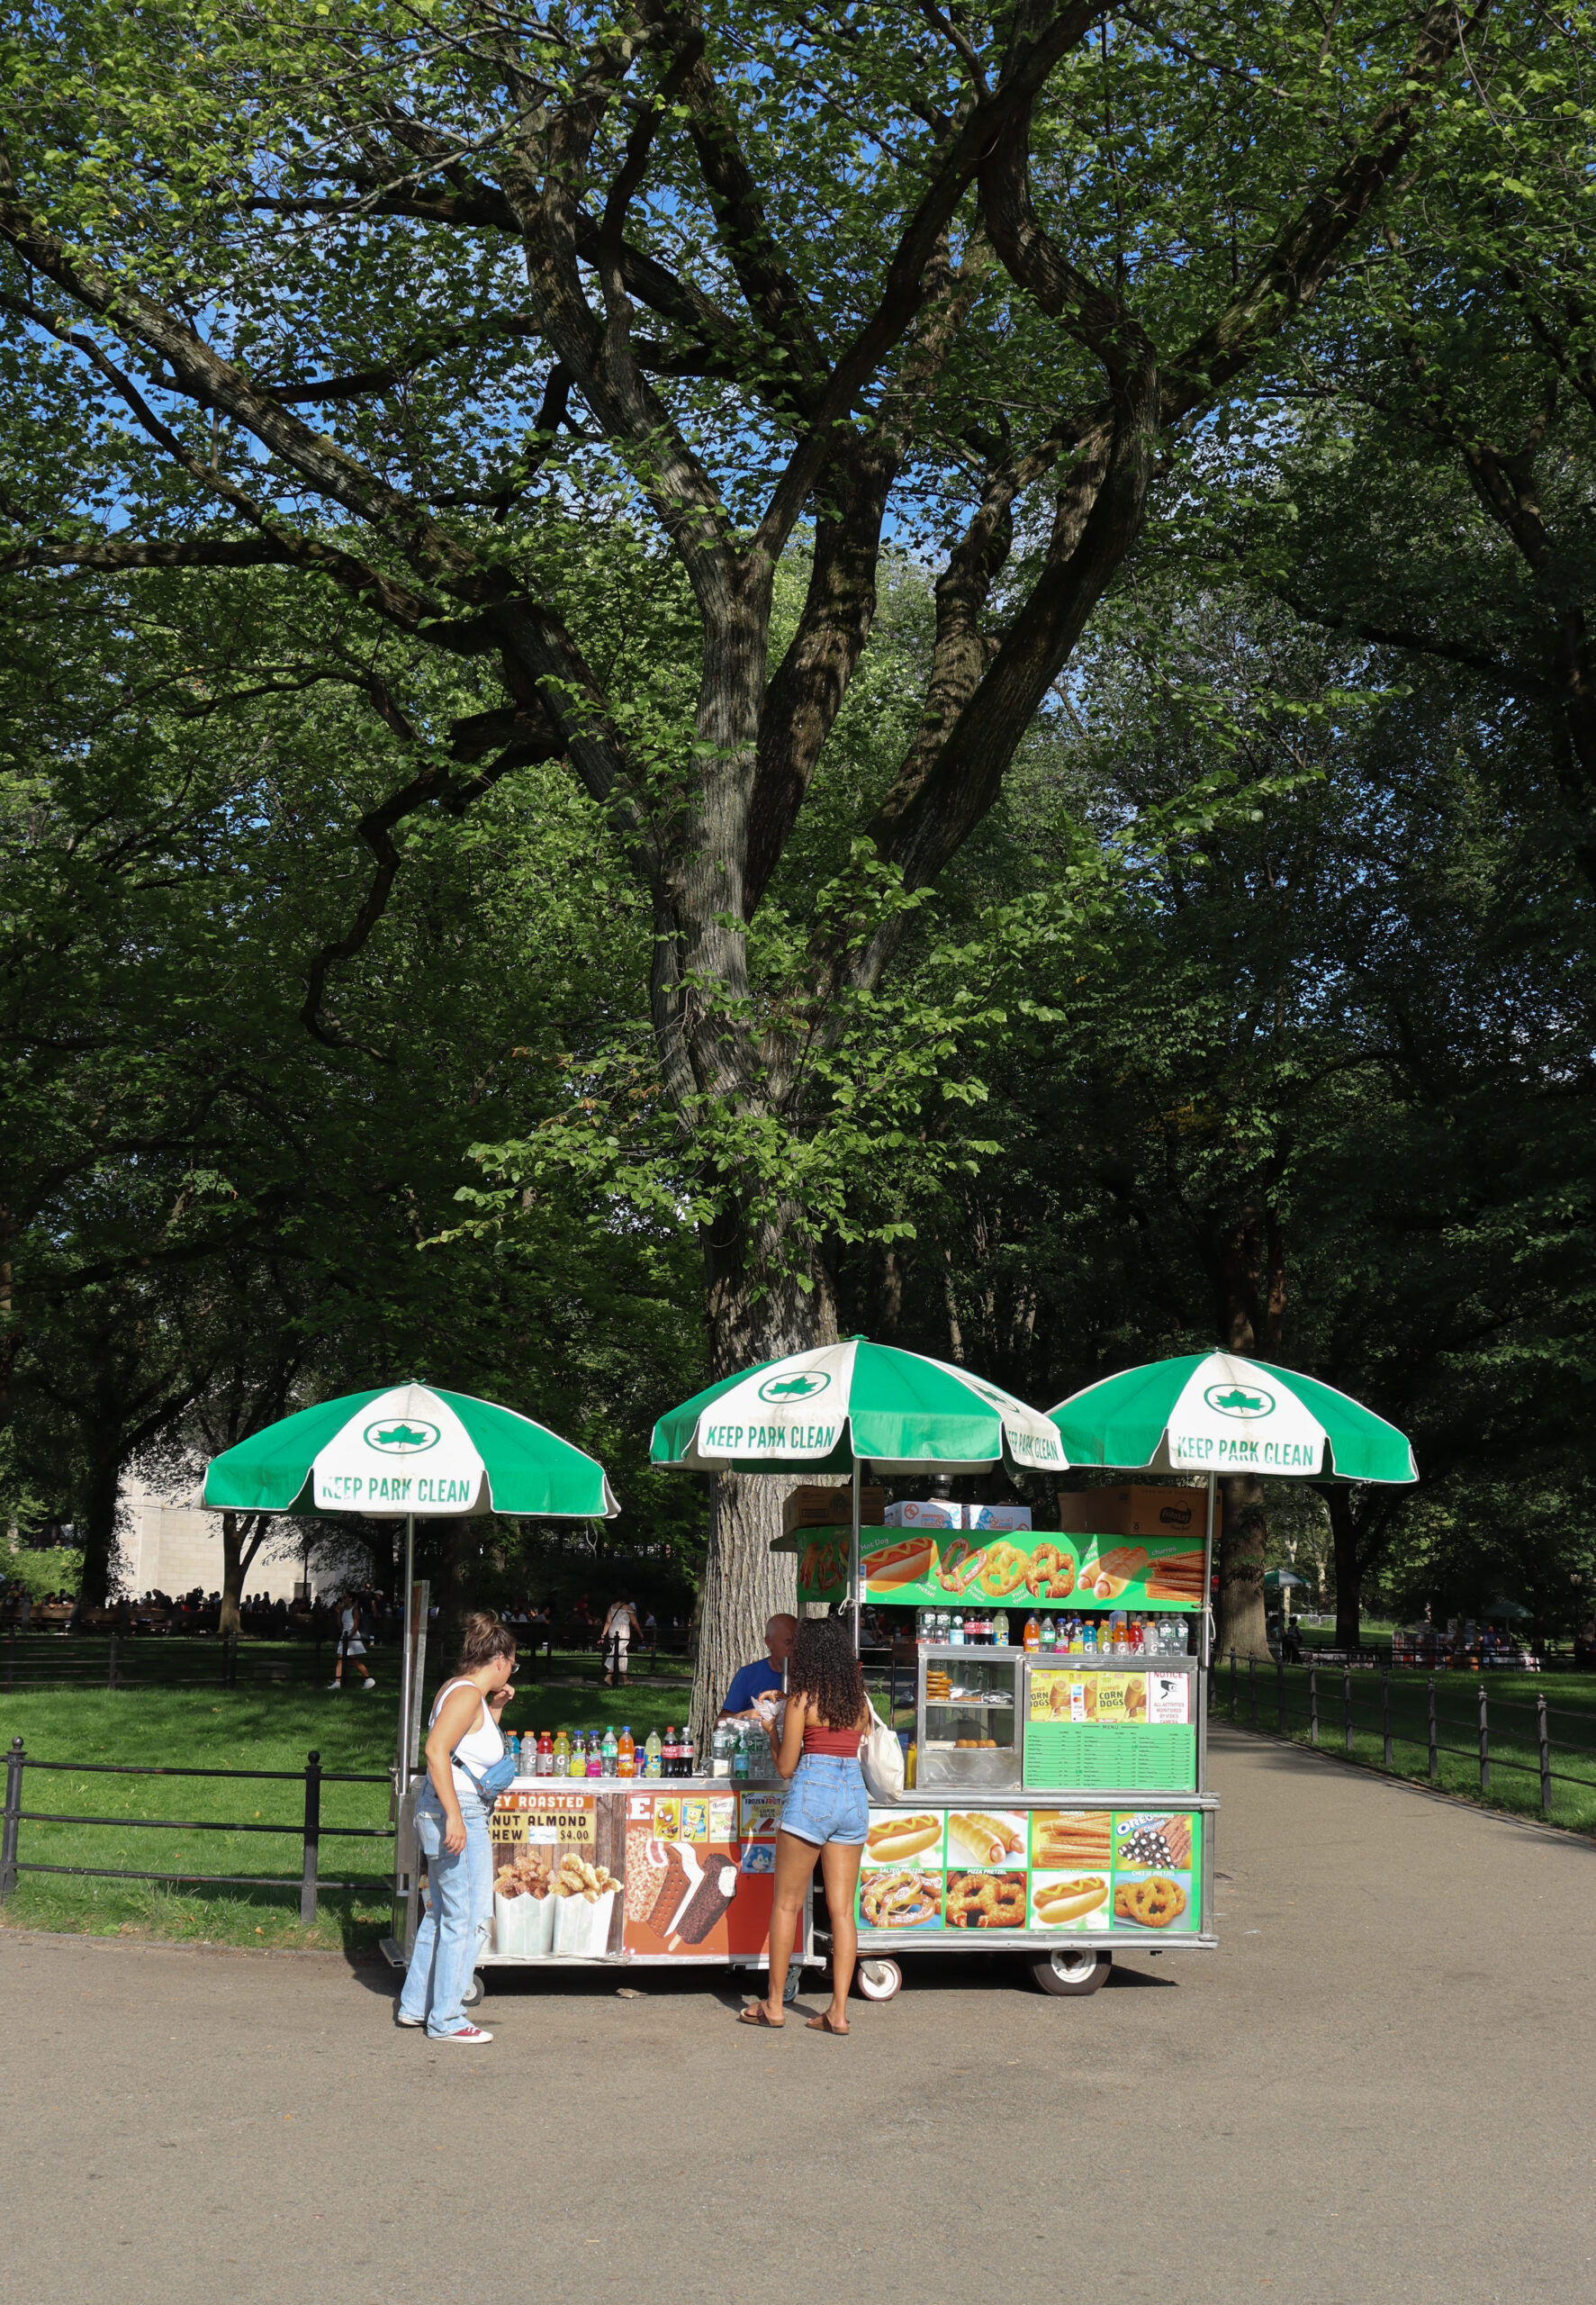 A green food truck selling the typical New York snacks in Central Park.